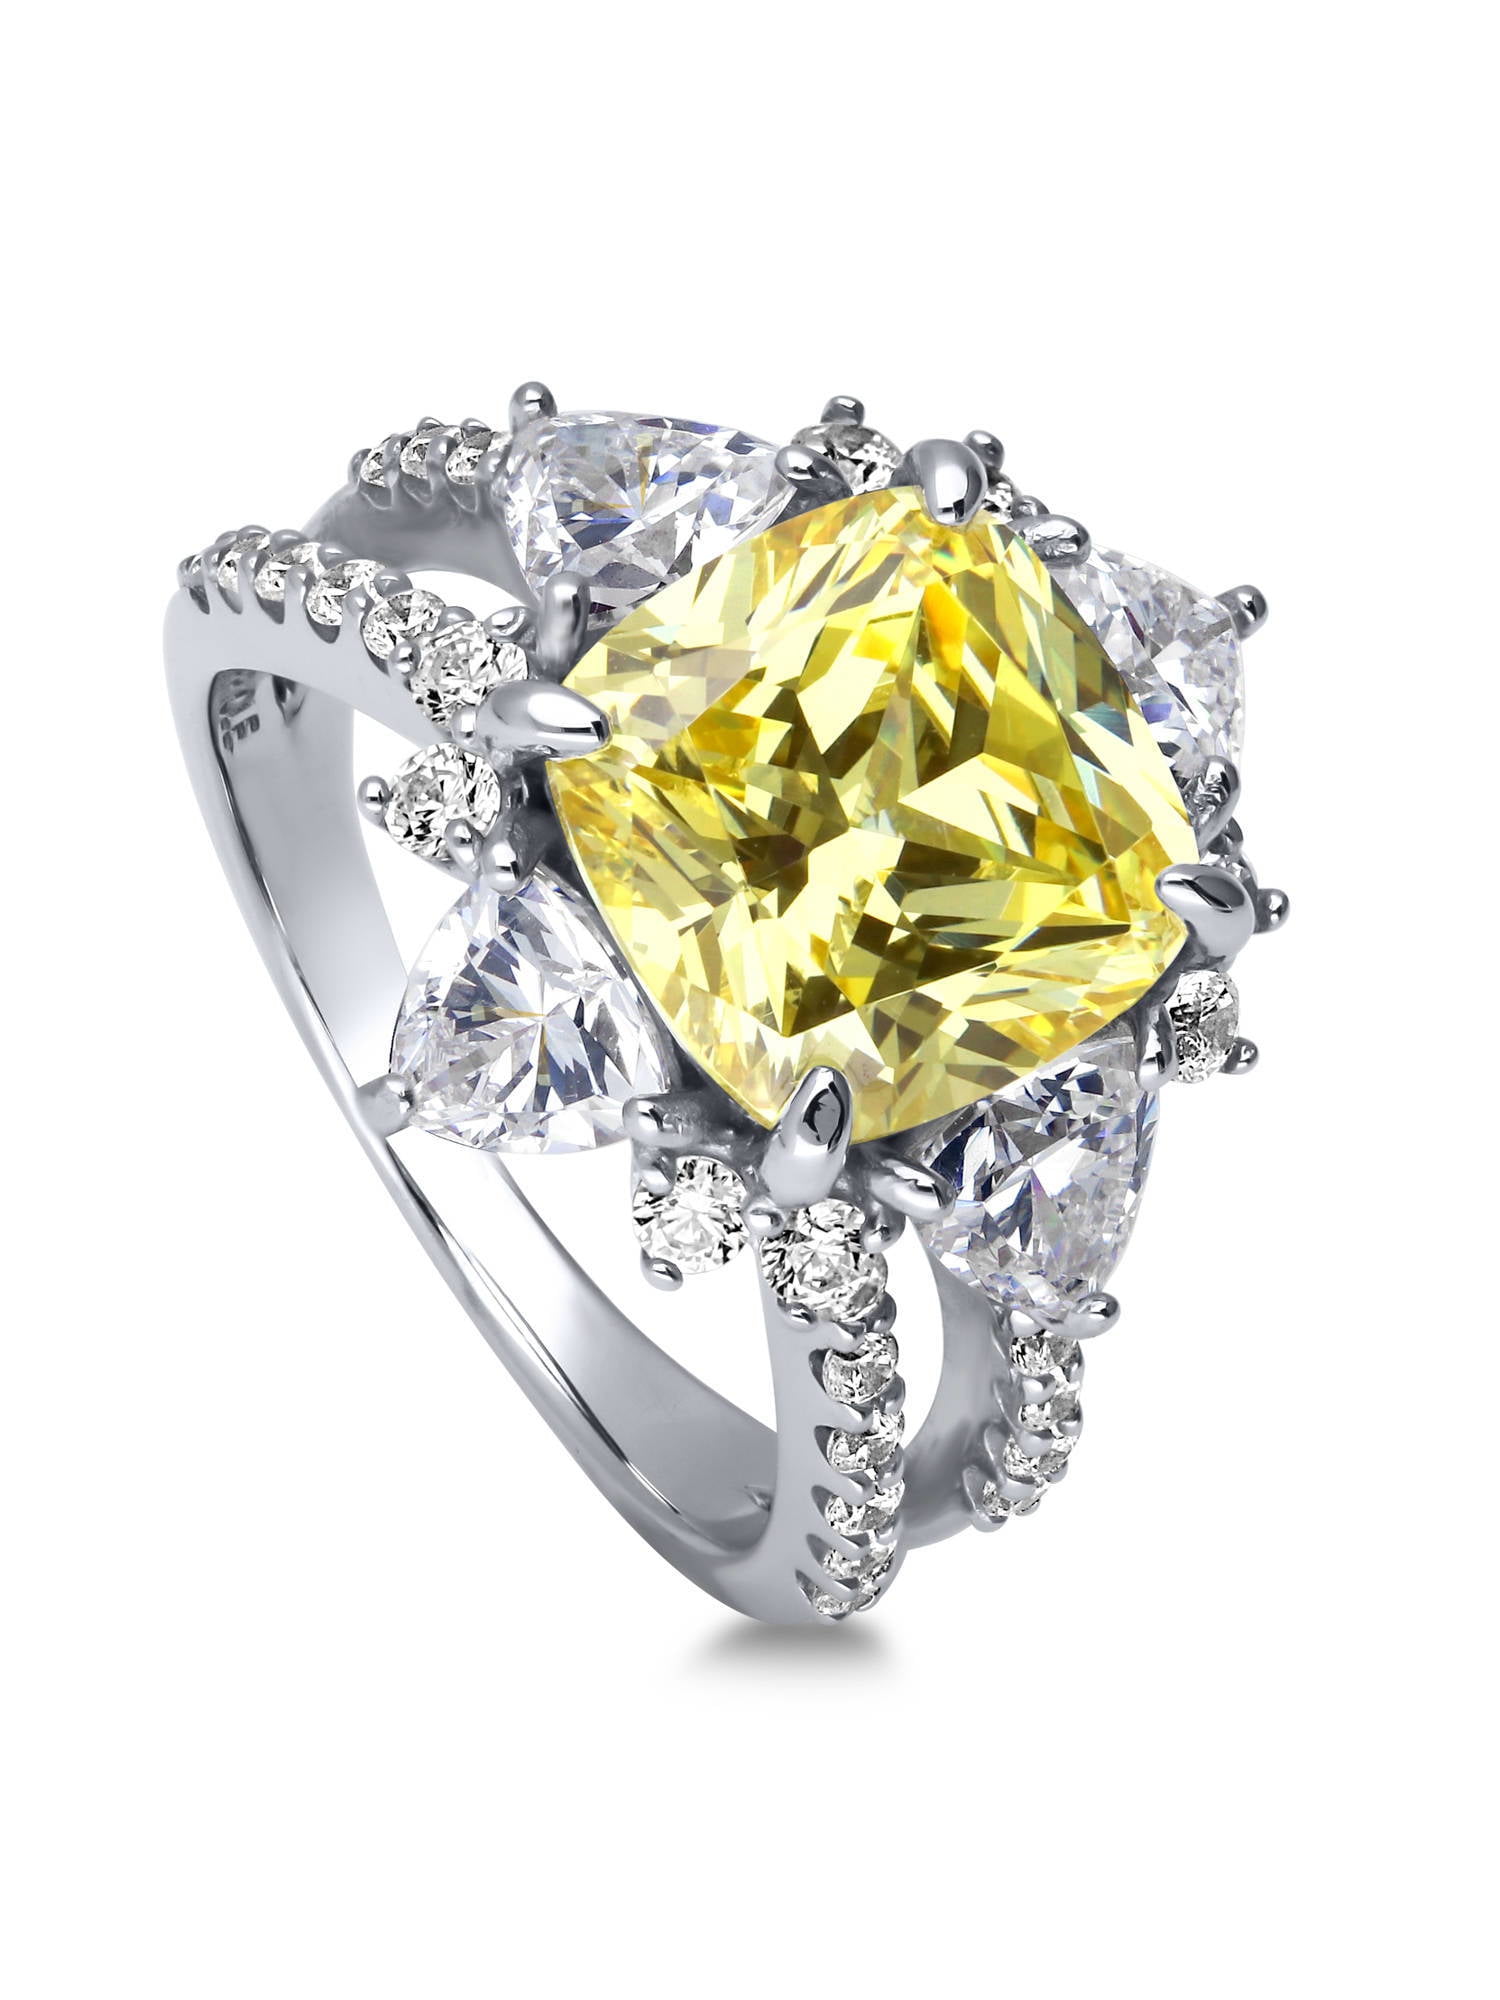 BERRICLE Rhodium Plated Sterling Silver Canary Yellow Cushion Cut Cubic  Zirconia CZ Statement Halo Flower Cocktail Fashion Right Hand Split Shank  Ring